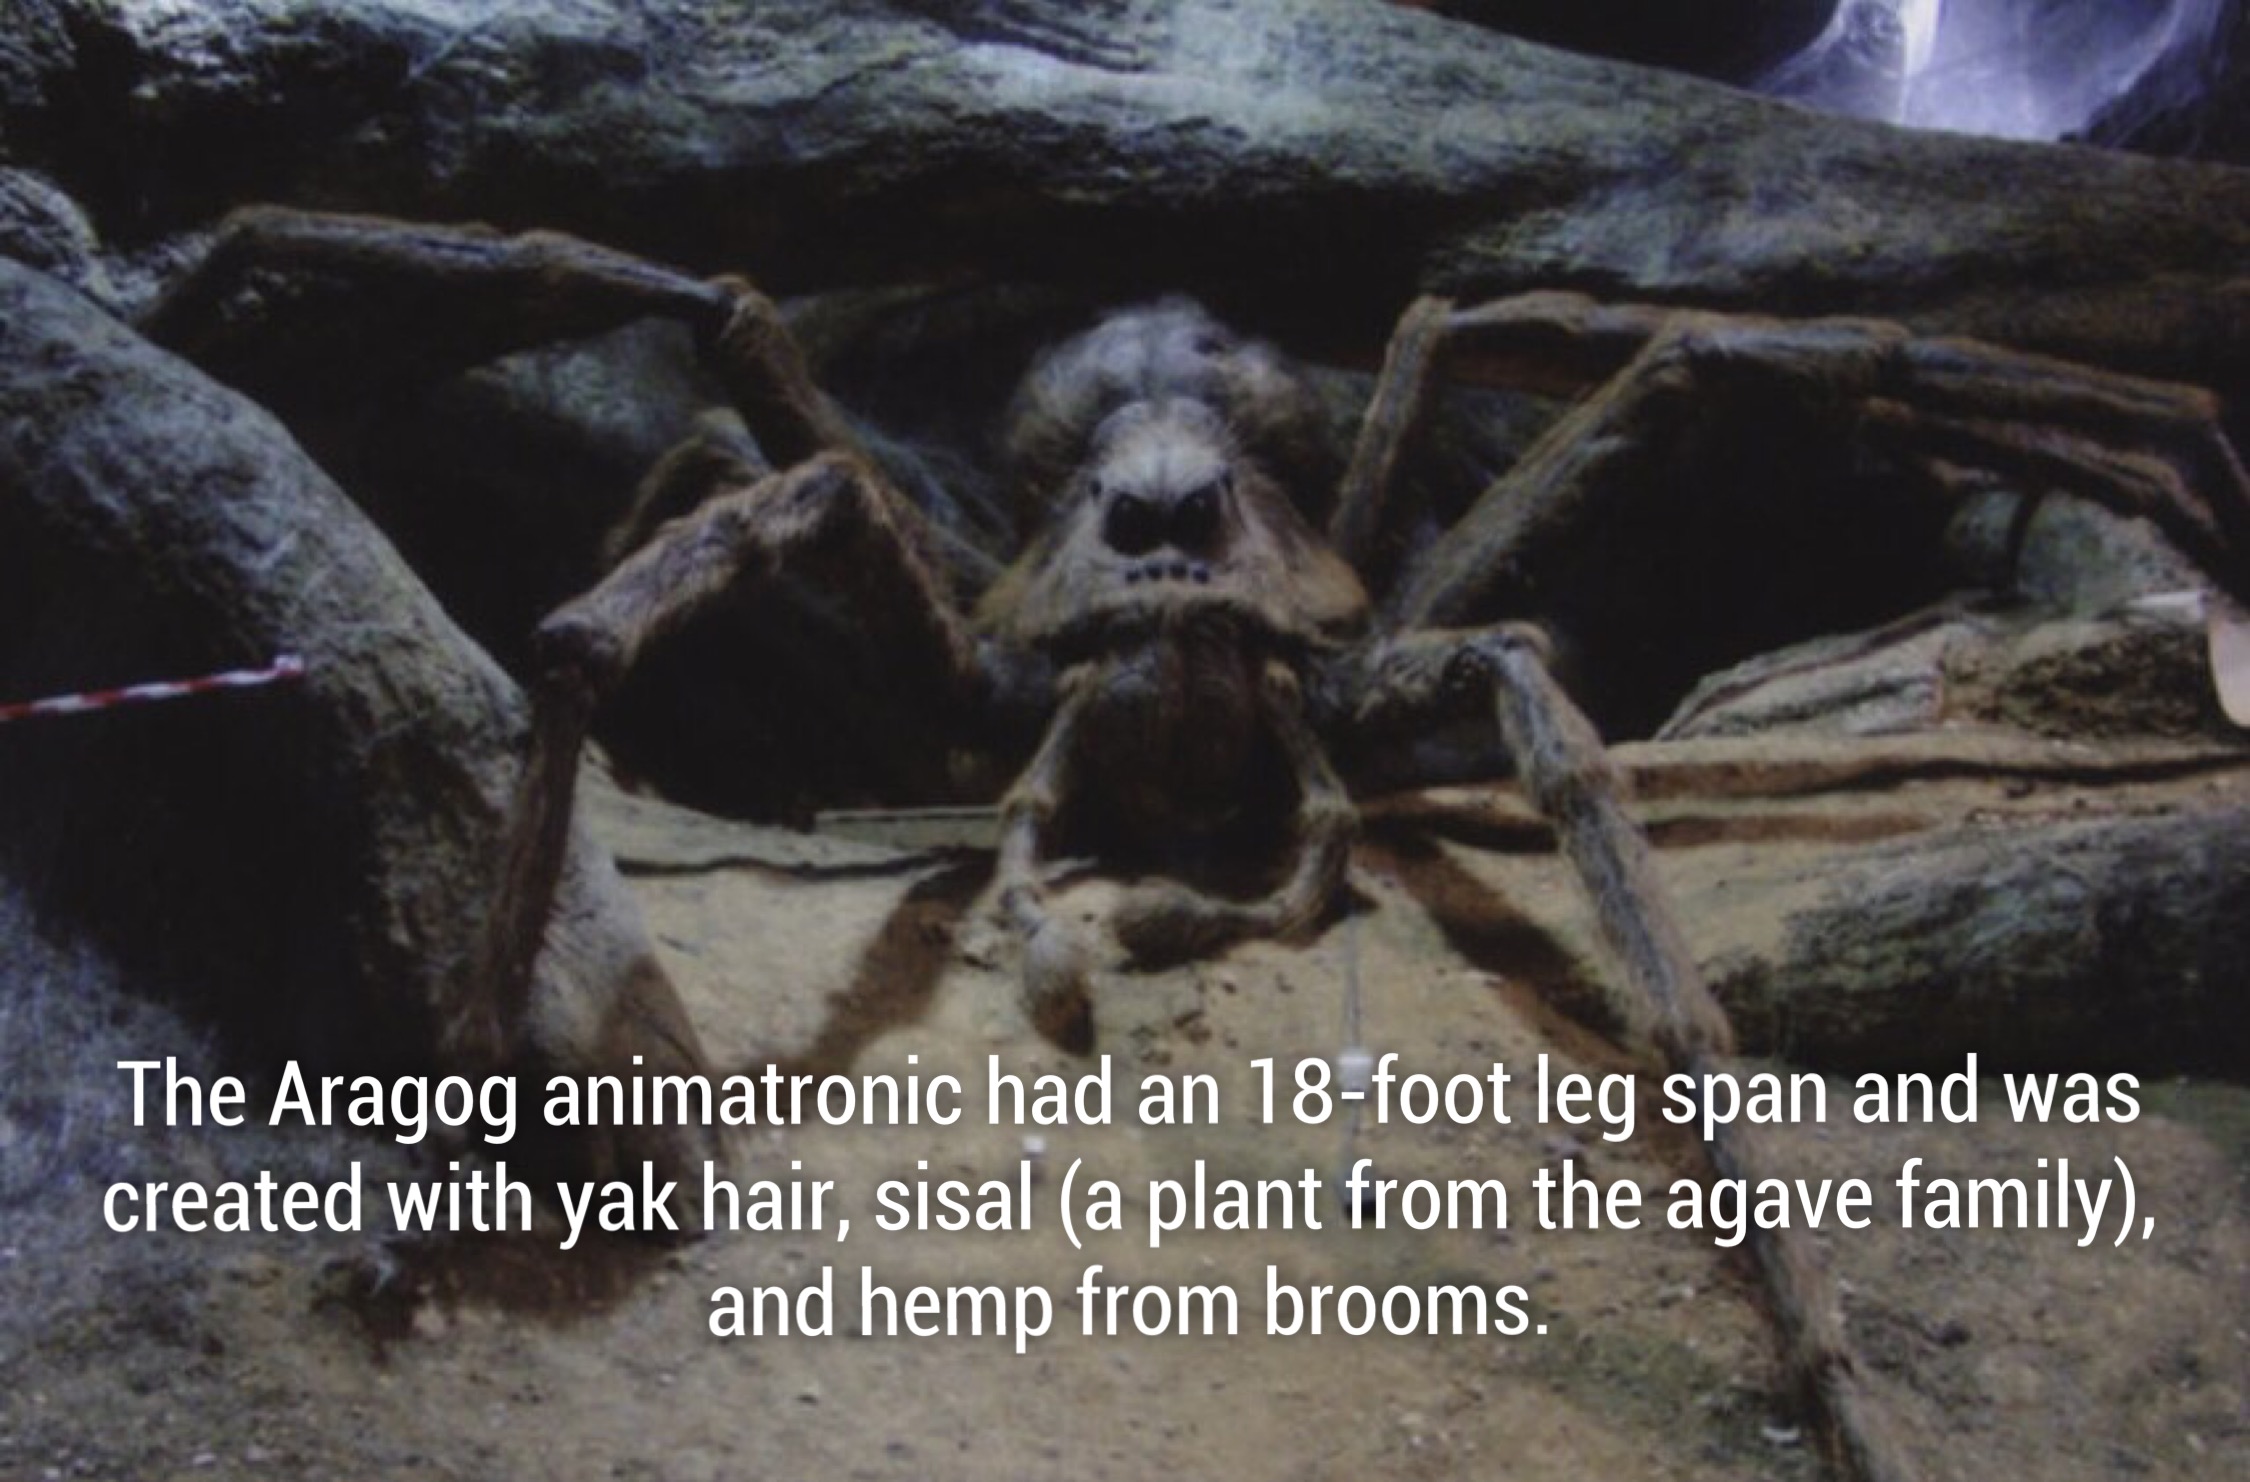 hagrid's animals - The Aragog animatronic had an 18foot leg span and was created with yak hair, sisal a plant from the agave family, and hemp from brooms.